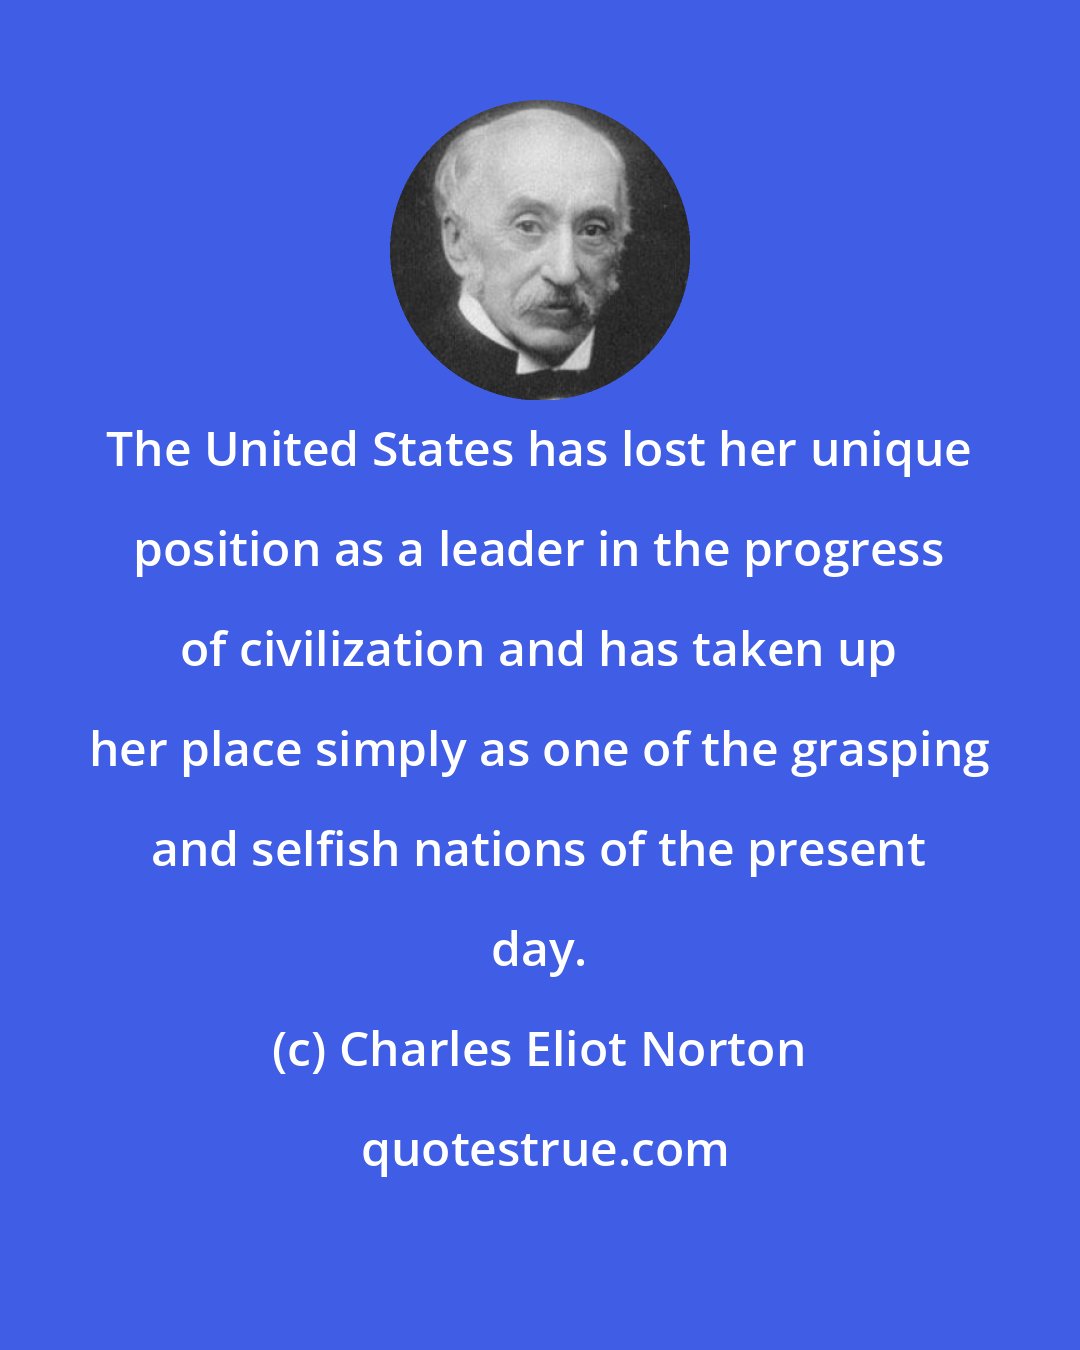 Charles Eliot Norton: The United States has lost her unique position as a leader in the progress of civilization and has taken up her place simply as one of the grasping and selfish nations of the present day.